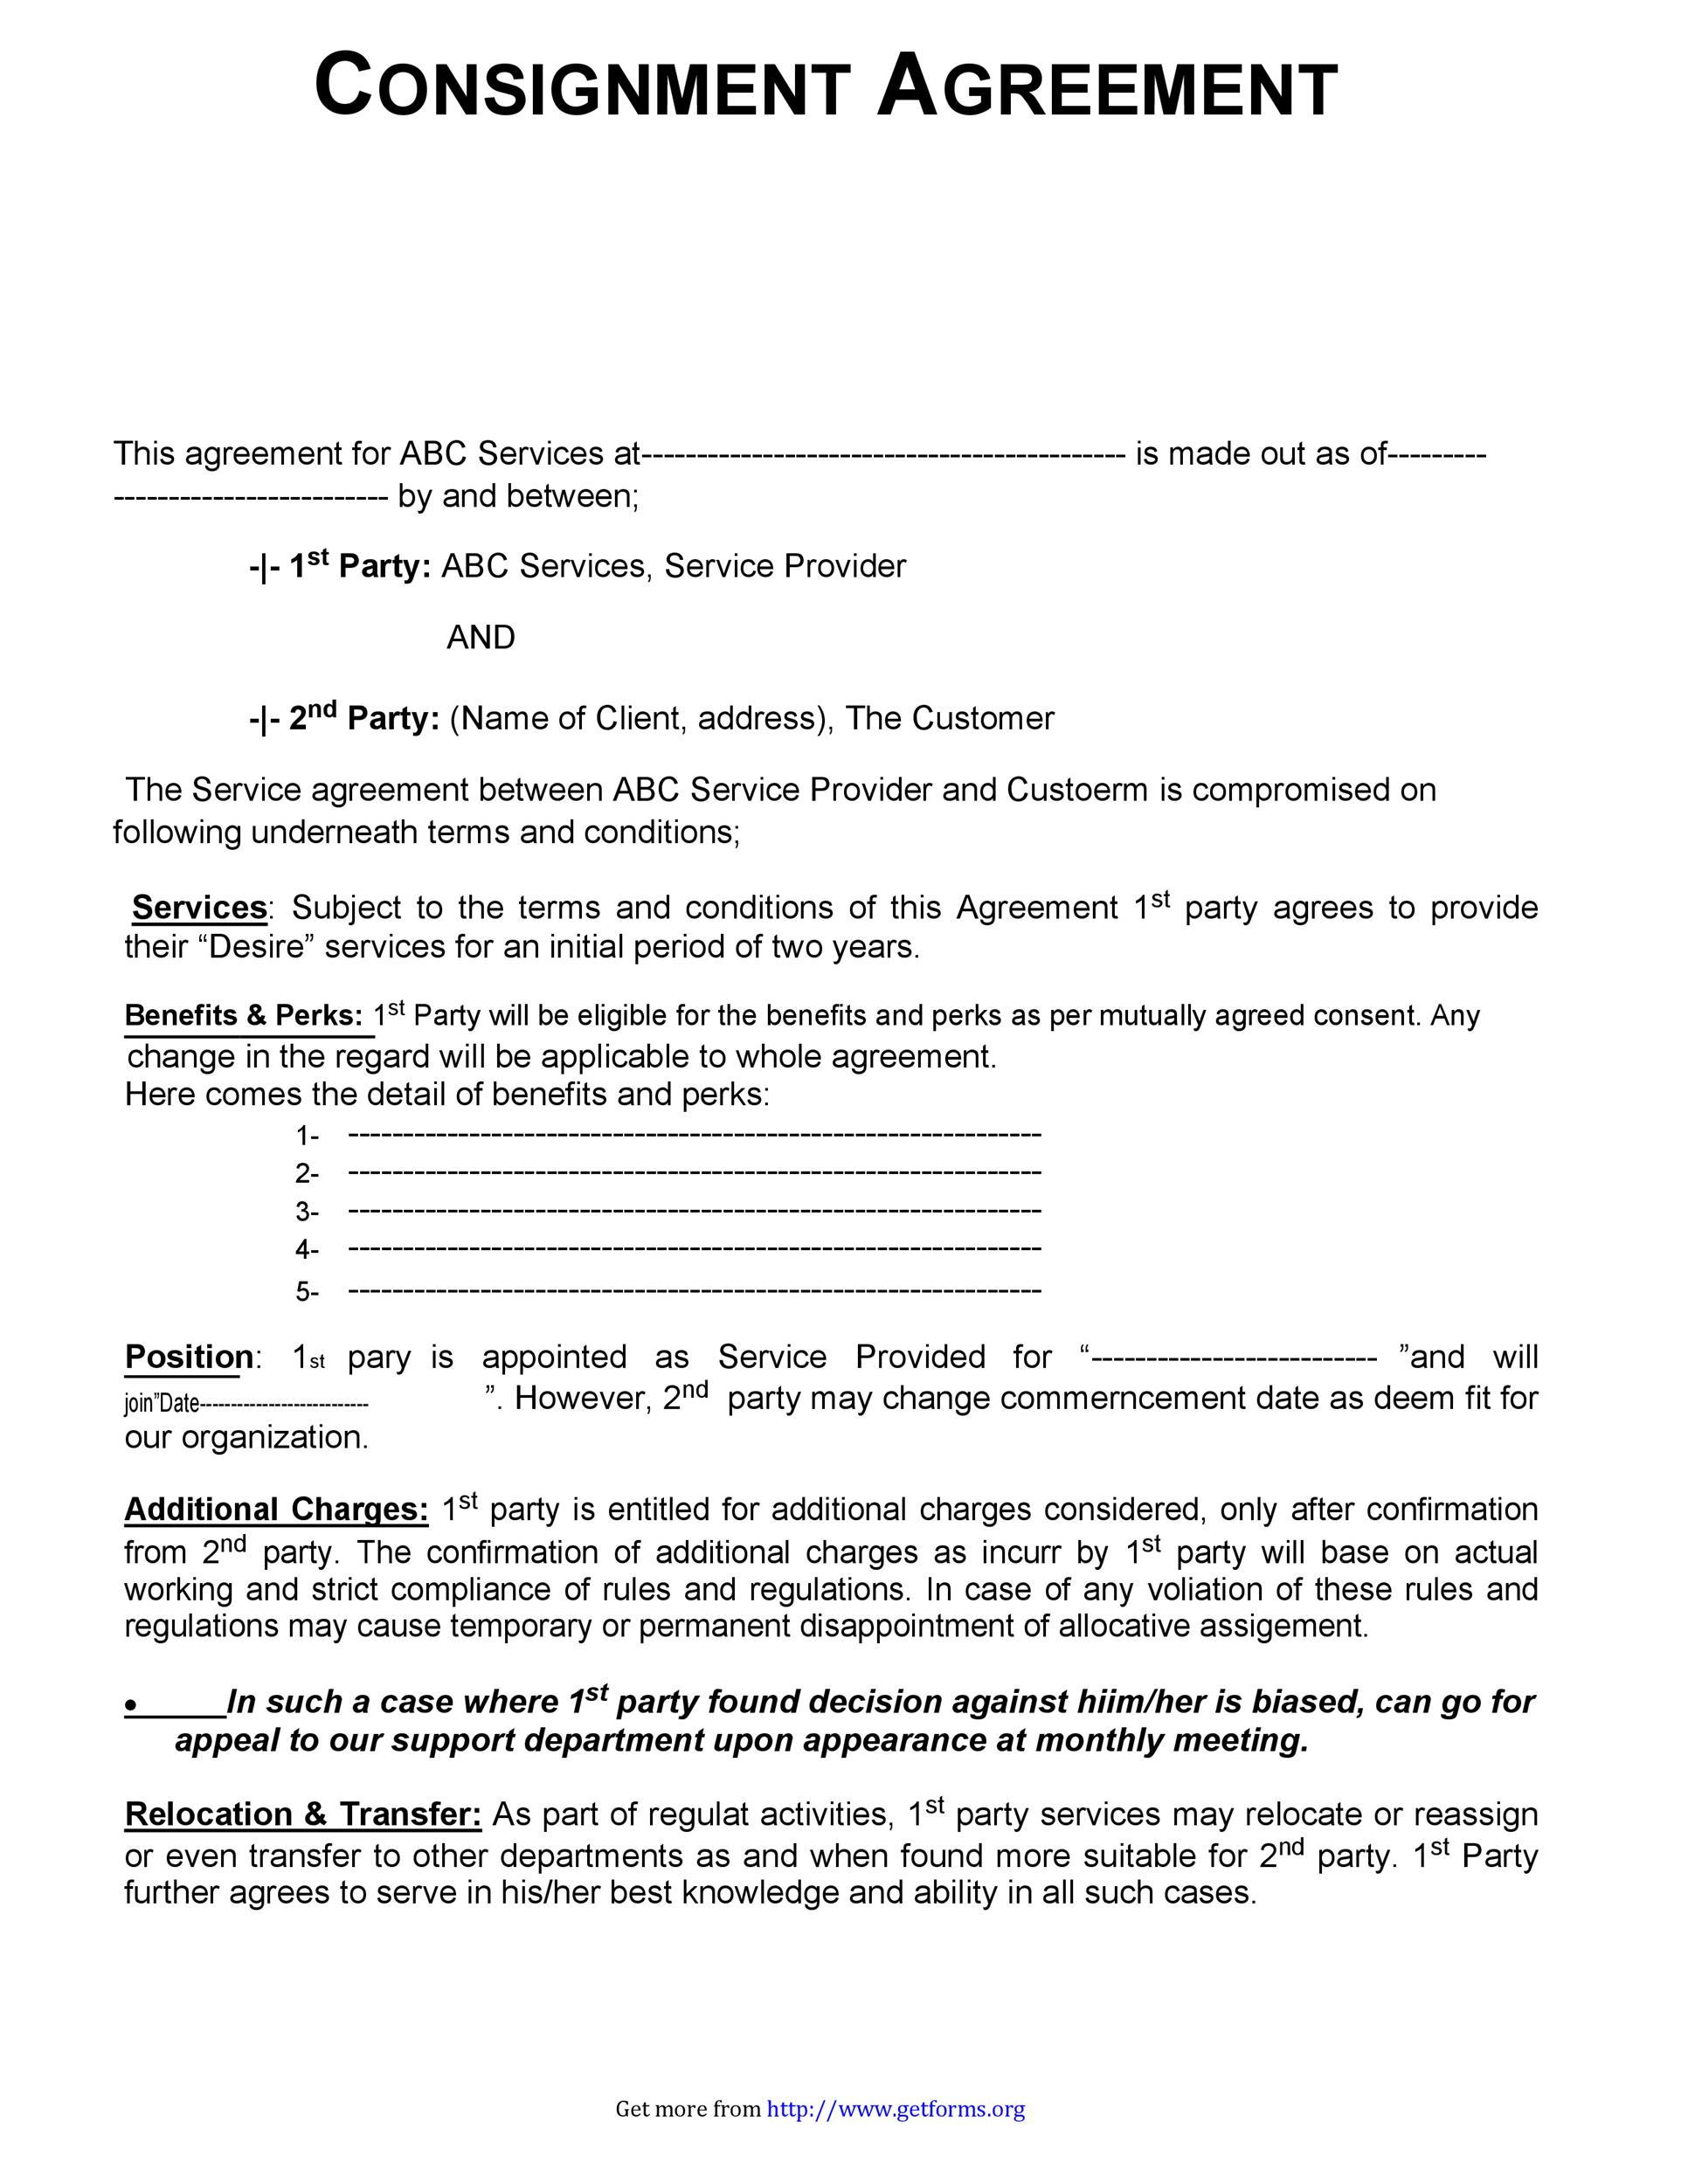 40 Best Consignment Agreement Templates Forms TemplateLab